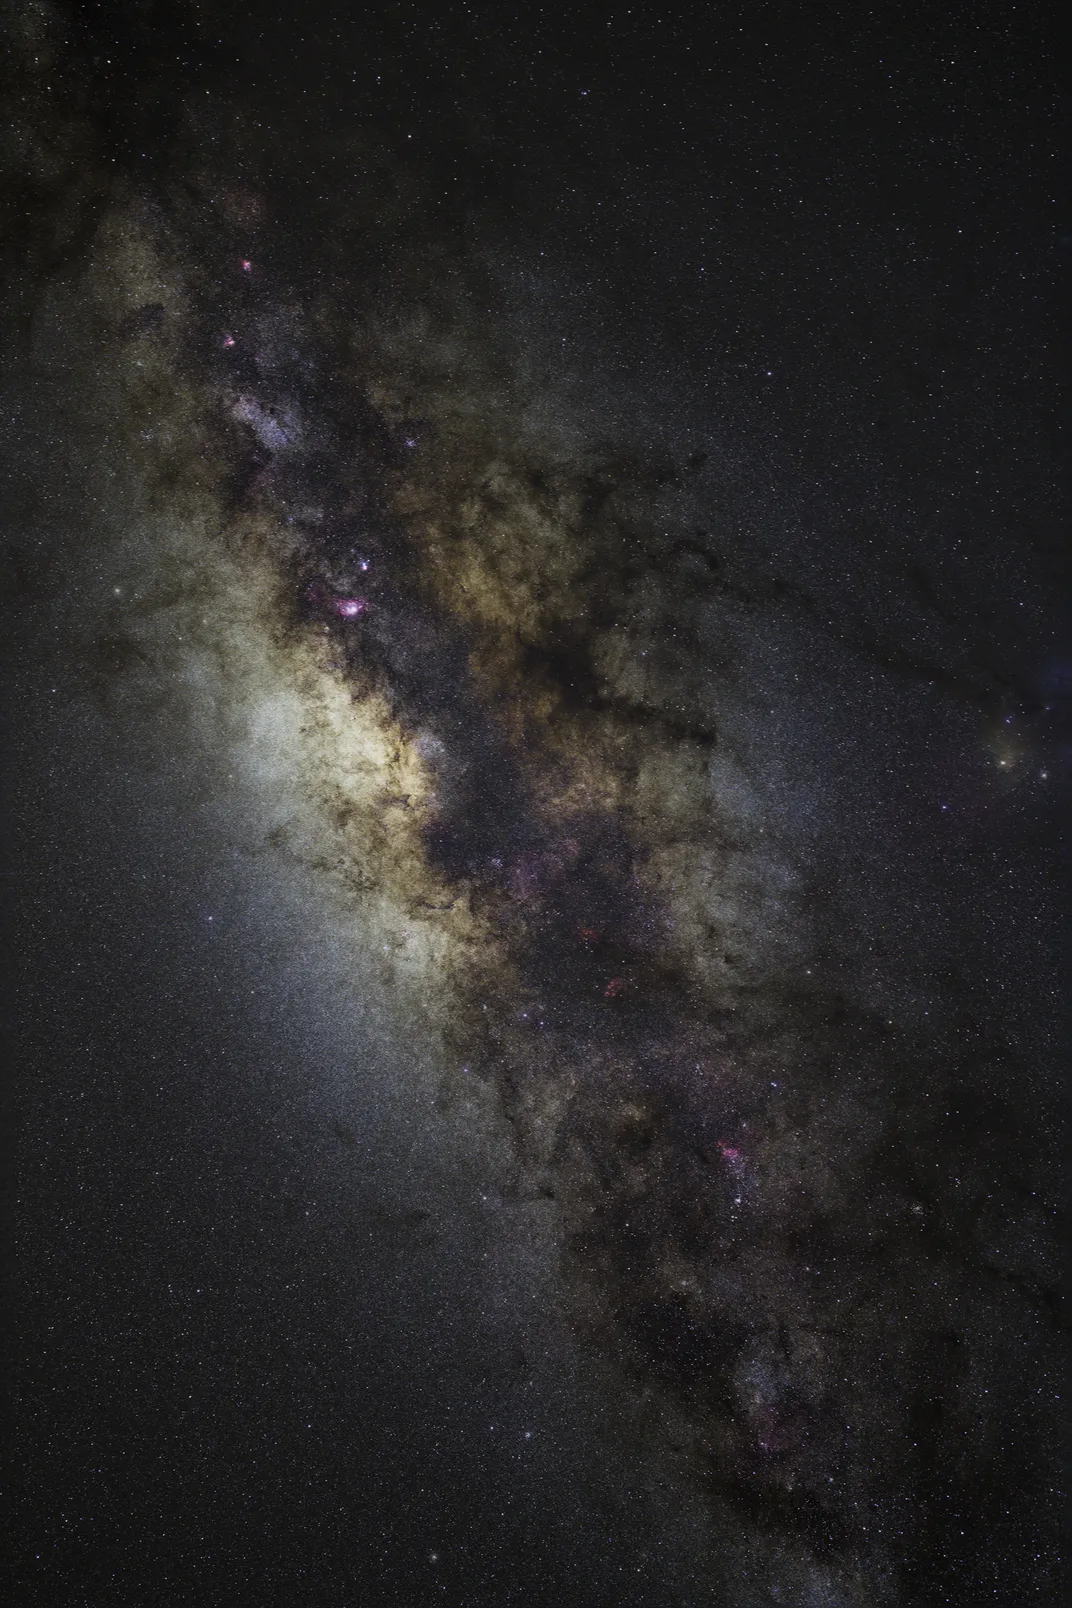 the stars and web-like structures of the Milky Way glow in a belt stretching diagonally from the image's top left to bottom right